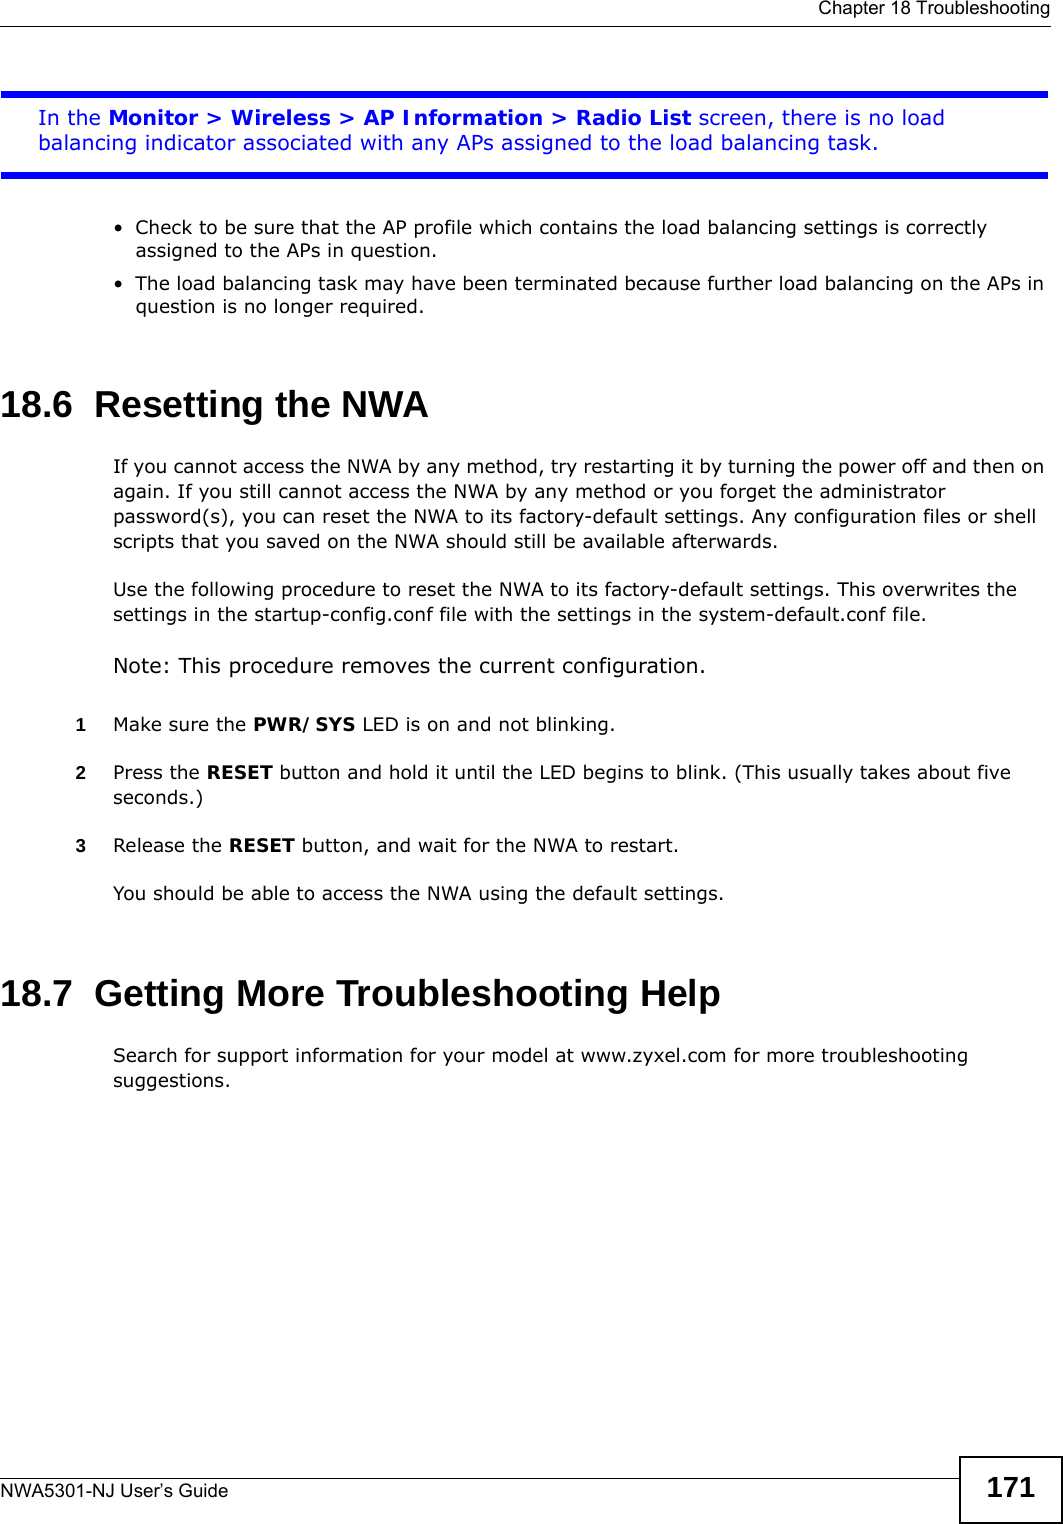  Chapter 18 TroubleshootingNWA5301-NJ User’s Guide 171In the Monitor &gt; Wireless &gt; AP Information &gt; Radio List screen, there is no load balancing indicator associated with any APs assigned to the load balancing task.• Check to be sure that the AP profile which contains the load balancing settings is correctly assigned to the APs in question.• The load balancing task may have been terminated because further load balancing on the APs in question is no longer required.18.6  Resetting the NWAIf you cannot access the NWA by any method, try restarting it by turning the power off and then on again. If you still cannot access the NWA by any method or you forget the administrator password(s), you can reset the NWA to its factory-default settings. Any configuration files or shell scripts that you saved on the NWA should still be available afterwards.Use the following procedure to reset the NWA to its factory-default settings. This overwrites the settings in the startup-config.conf file with the settings in the system-default.conf file. Note: This procedure removes the current configuration. 1Make sure the PWR/SYS LED is on and not blinking.2Press the RESET button and hold it until the LED begins to blink. (This usually takes about five seconds.)3Release the RESET button, and wait for the NWA to restart.You should be able to access the NWA using the default settings.18.7  Getting More Troubleshooting HelpSearch for support information for your model at www.zyxel.com for more troubleshooting suggestions.